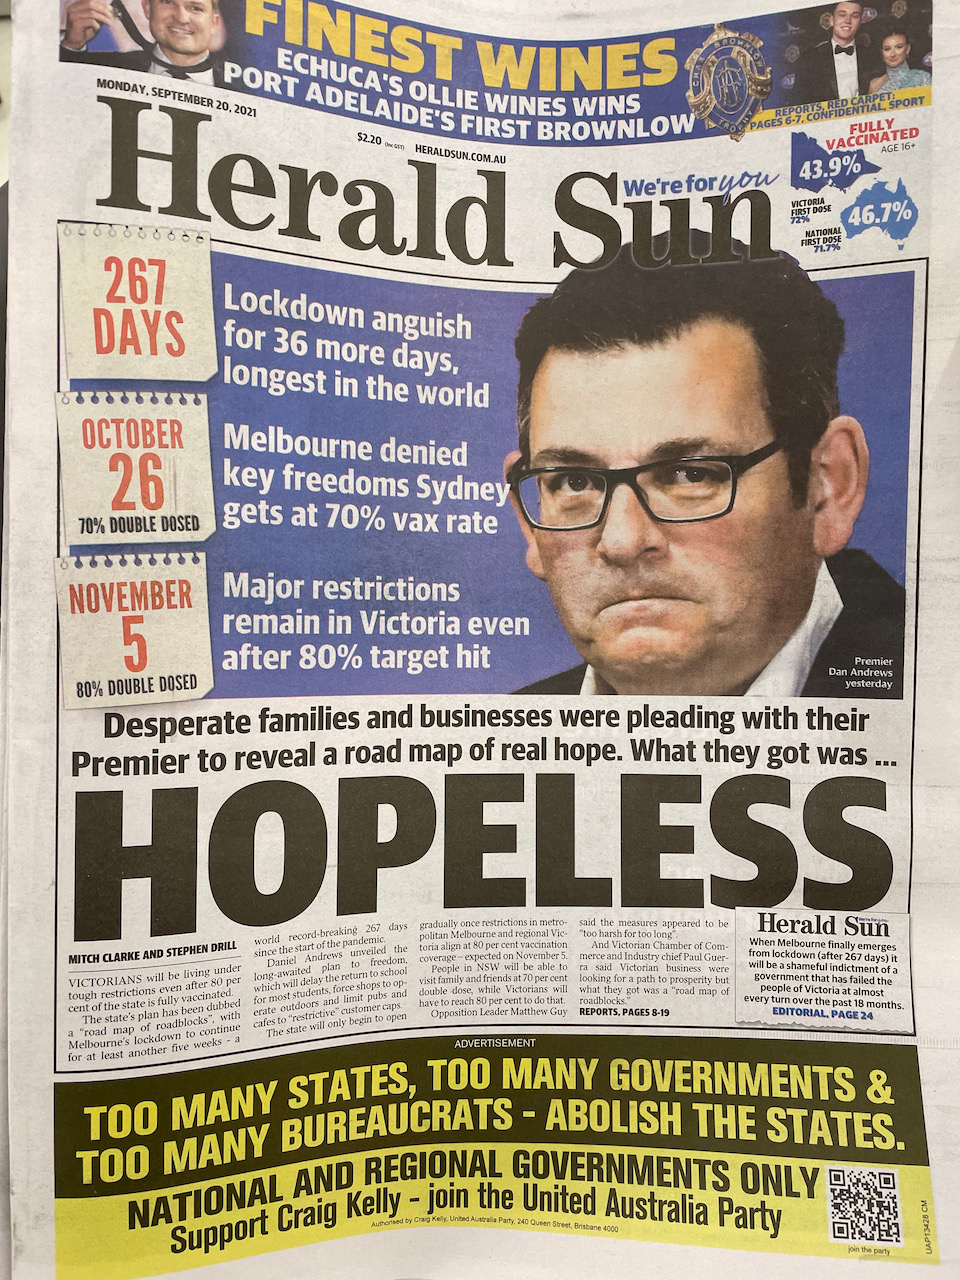 Another day political lobbying by the Herald Sun | Australian Newsagency